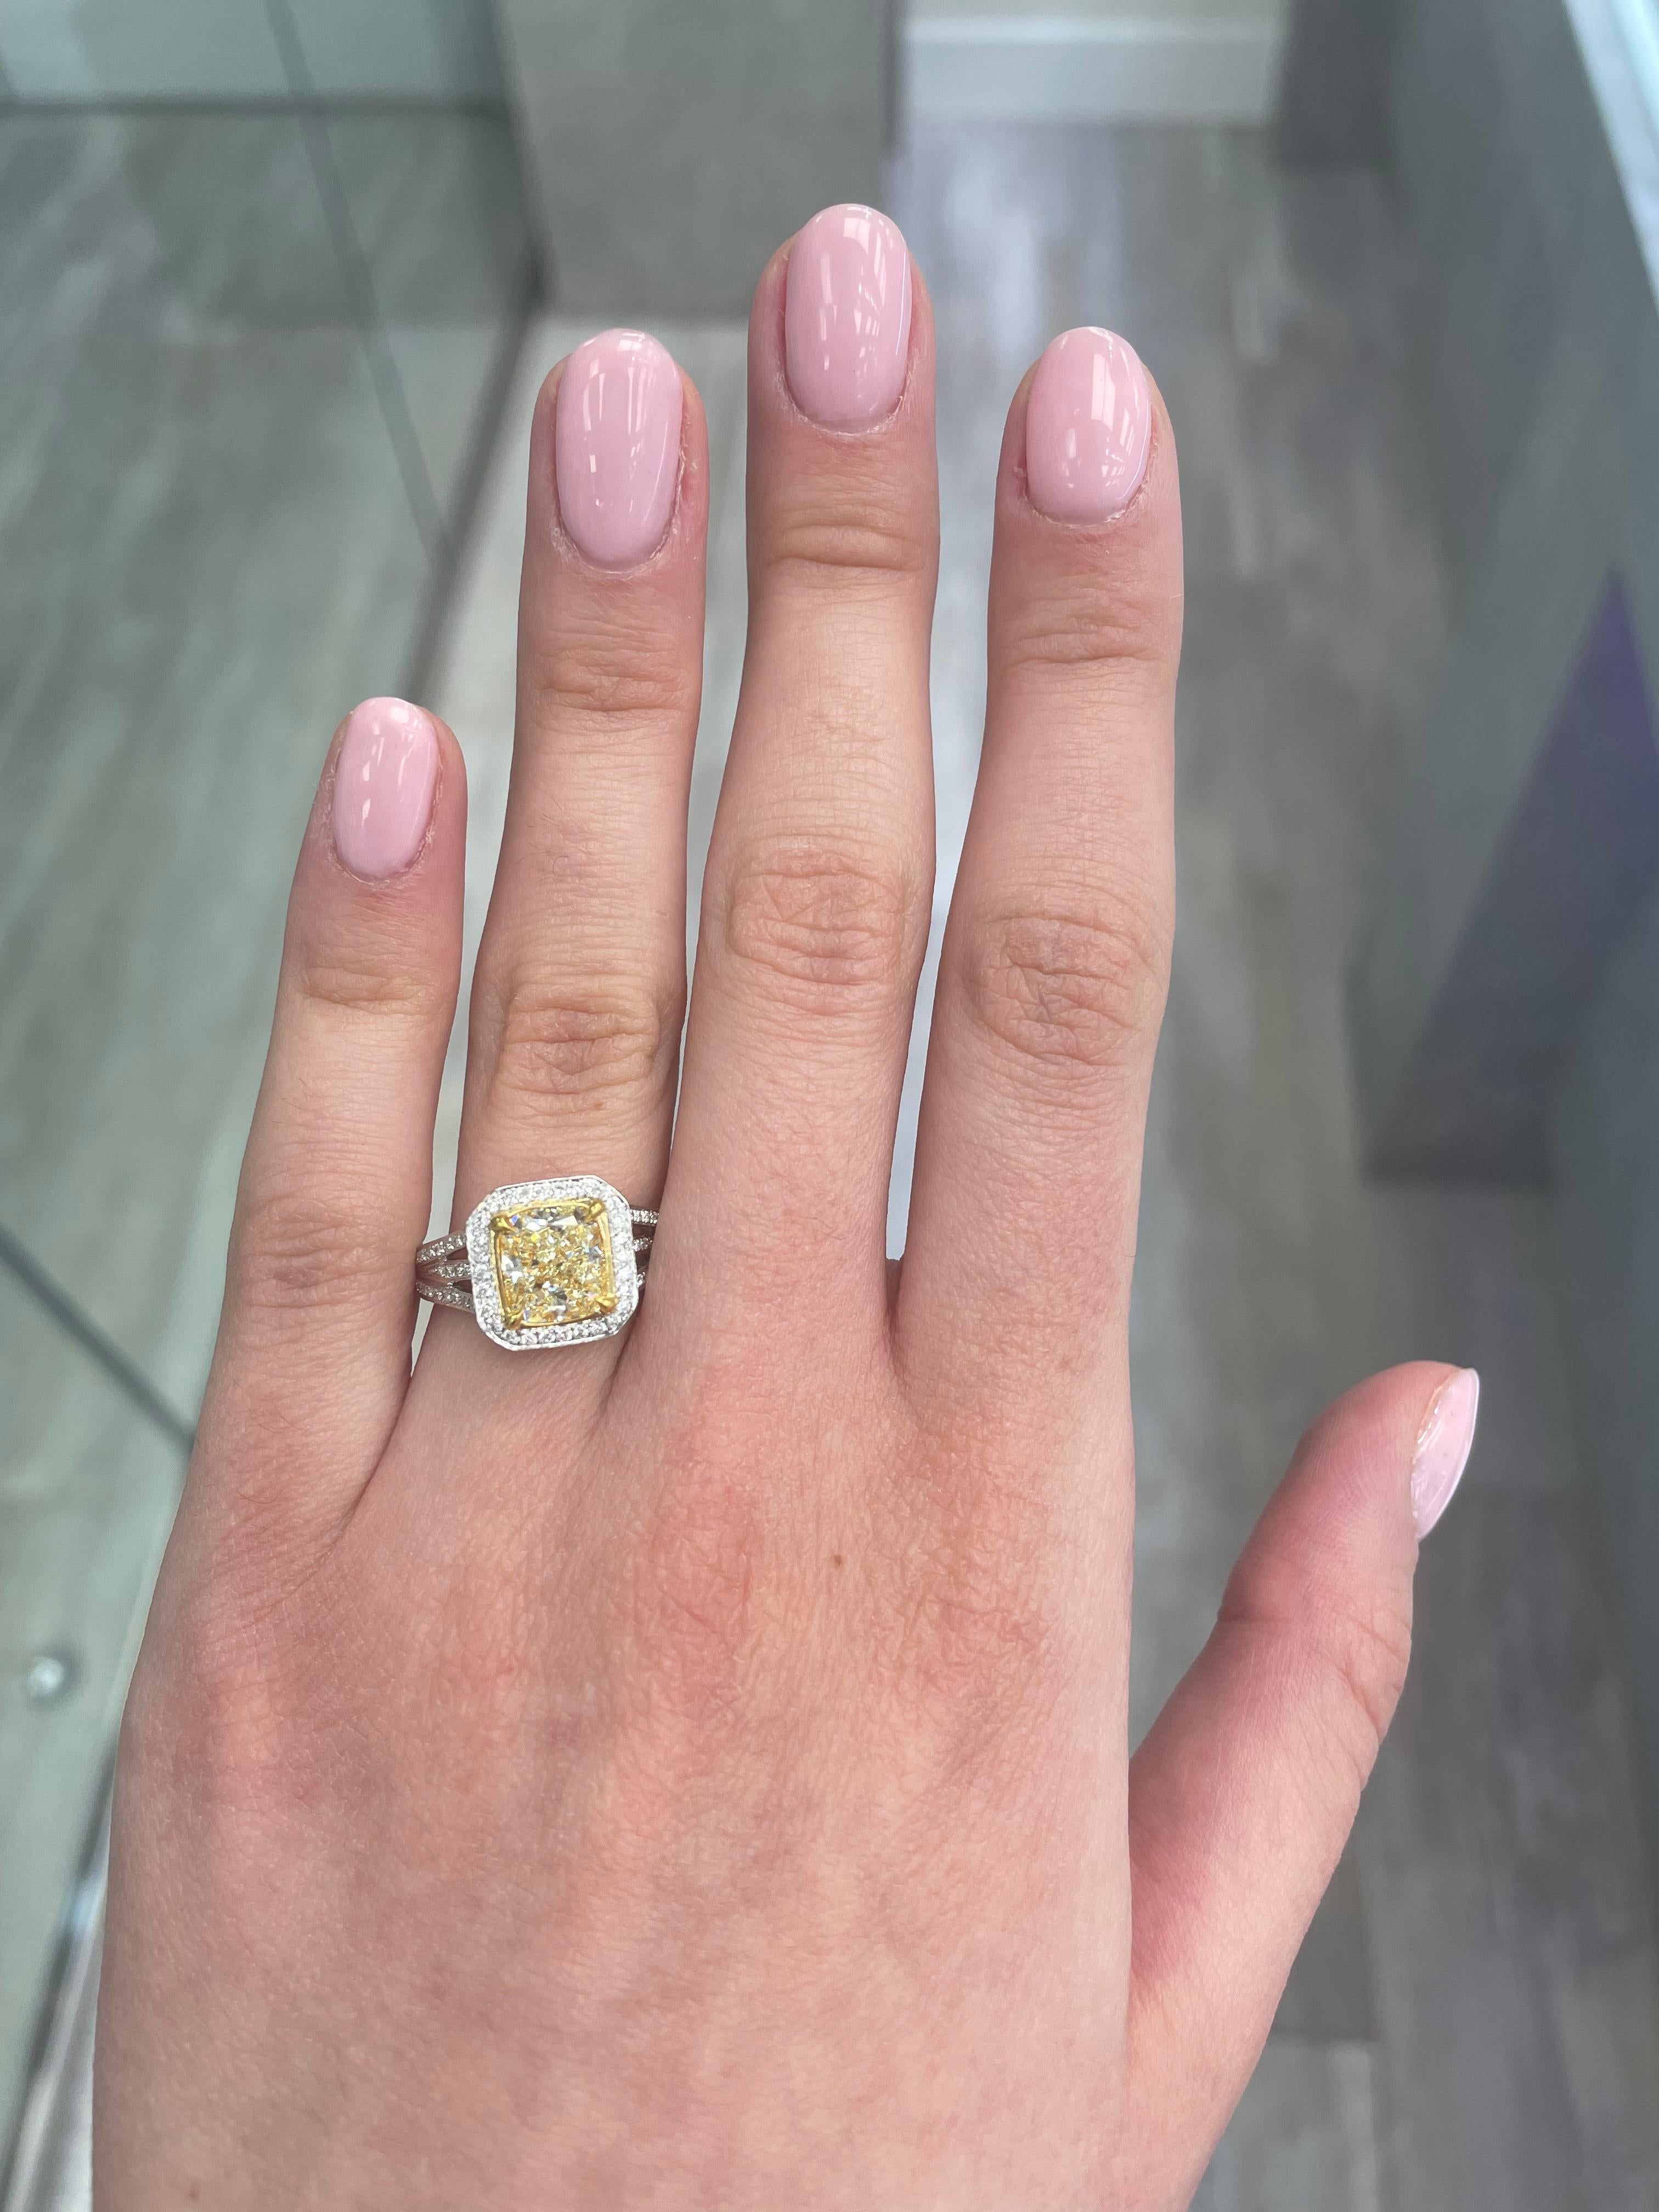 Stunning modern EGL certified fancy yellow diamond halo ring, two-tone 18k yellow and white gold, split shank. By Alexander Beverly Hills
2.78 carats total diamond weight.
2.17 carat cushion Fancy Yellow color and VVS2 clarity diamond, EGL graded.